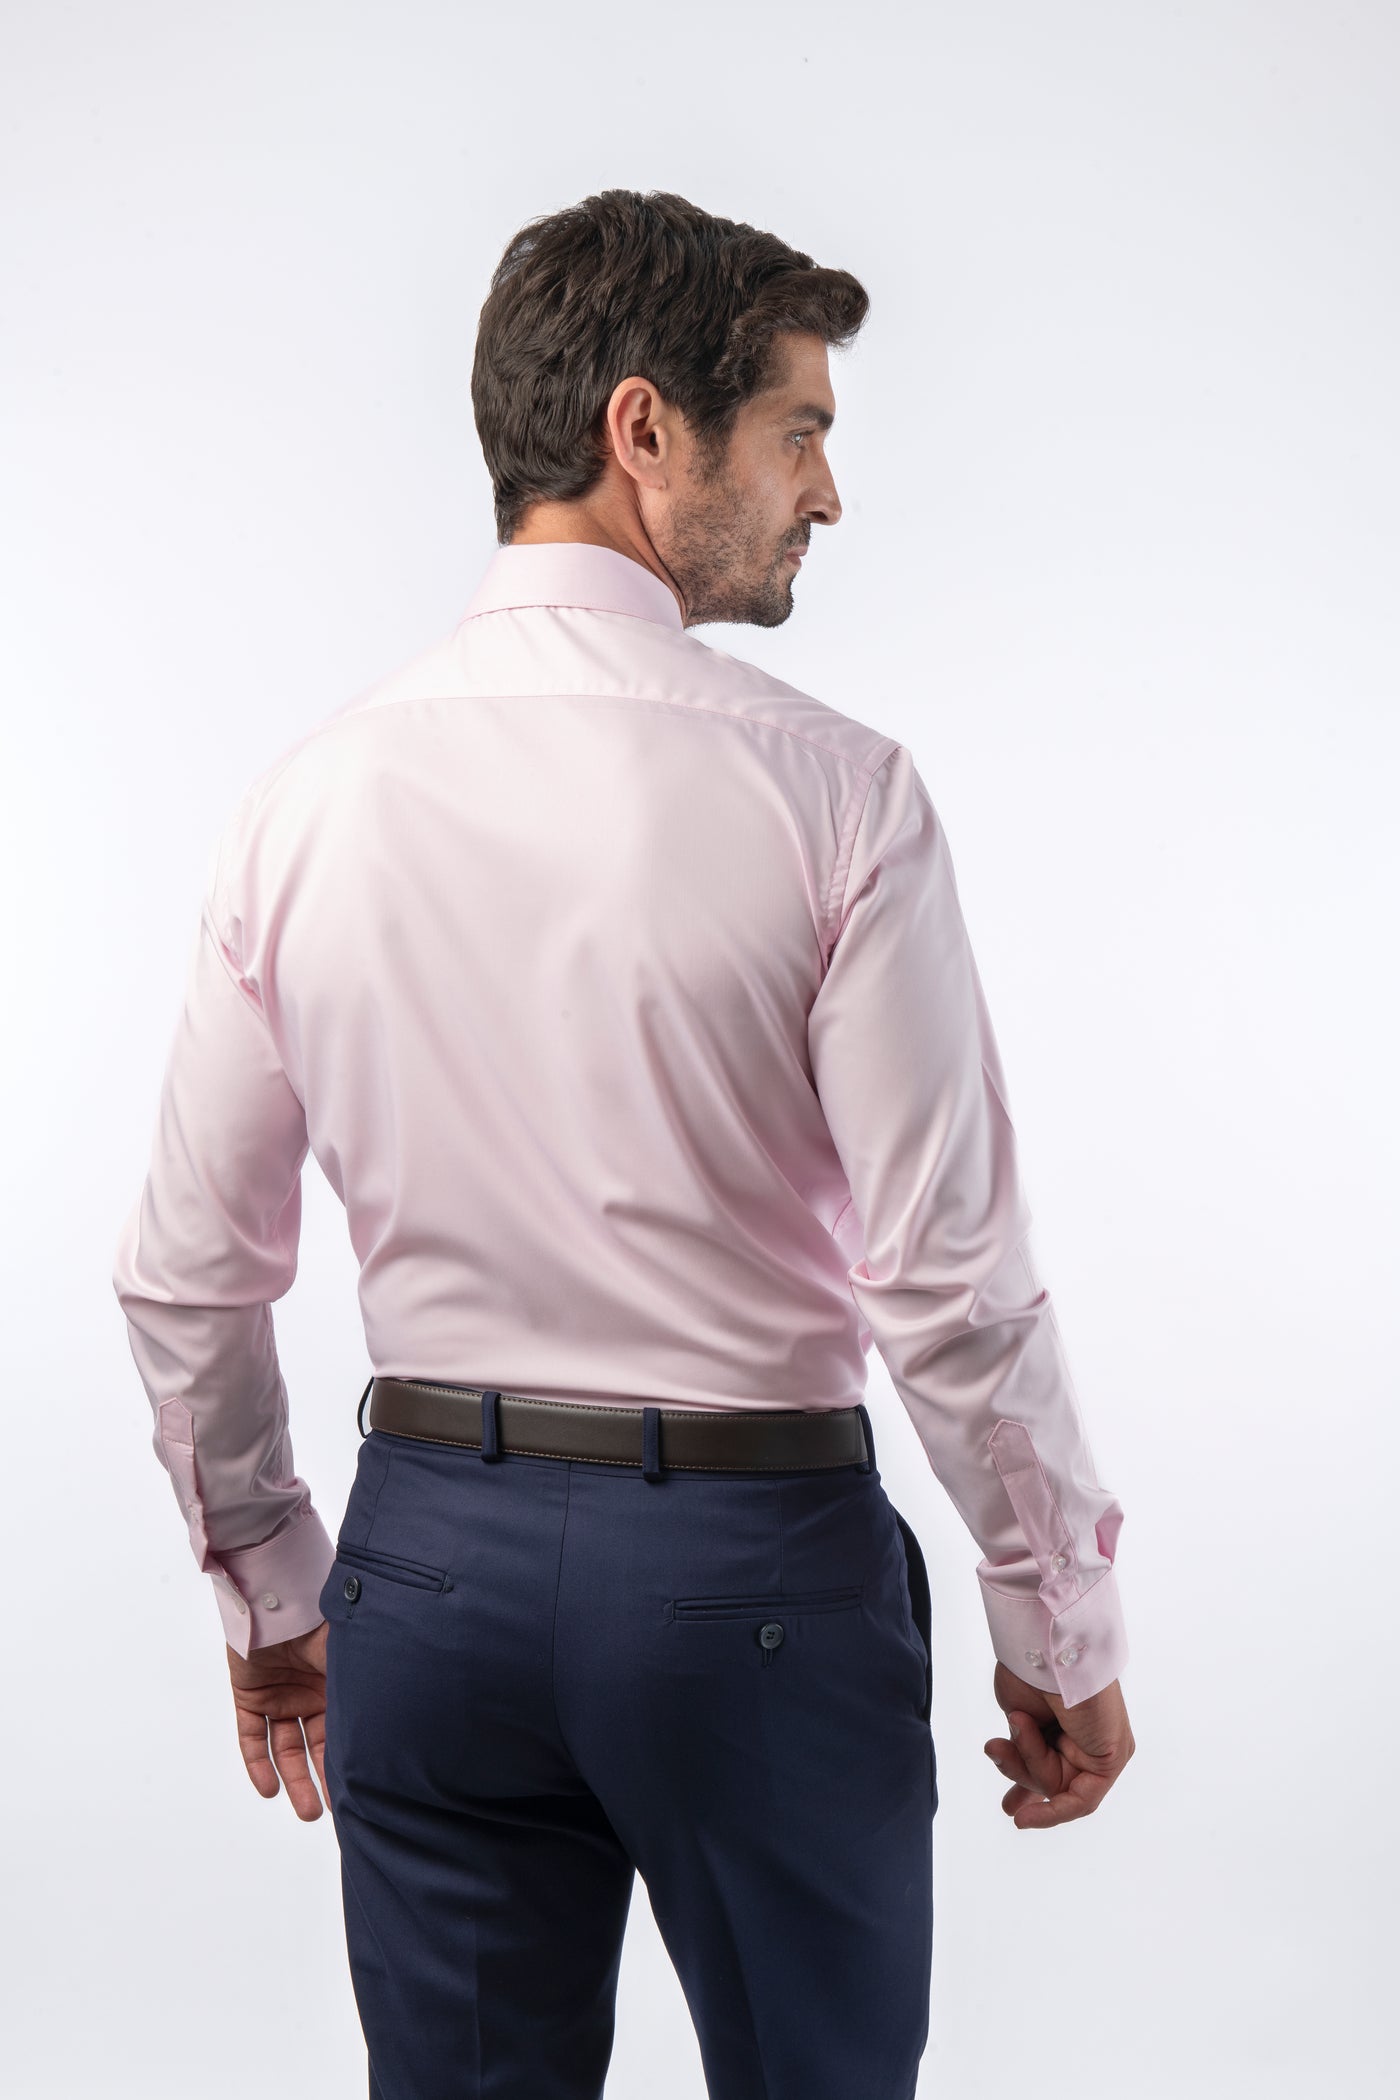 Bamboo Solid Rose Classic Shirt